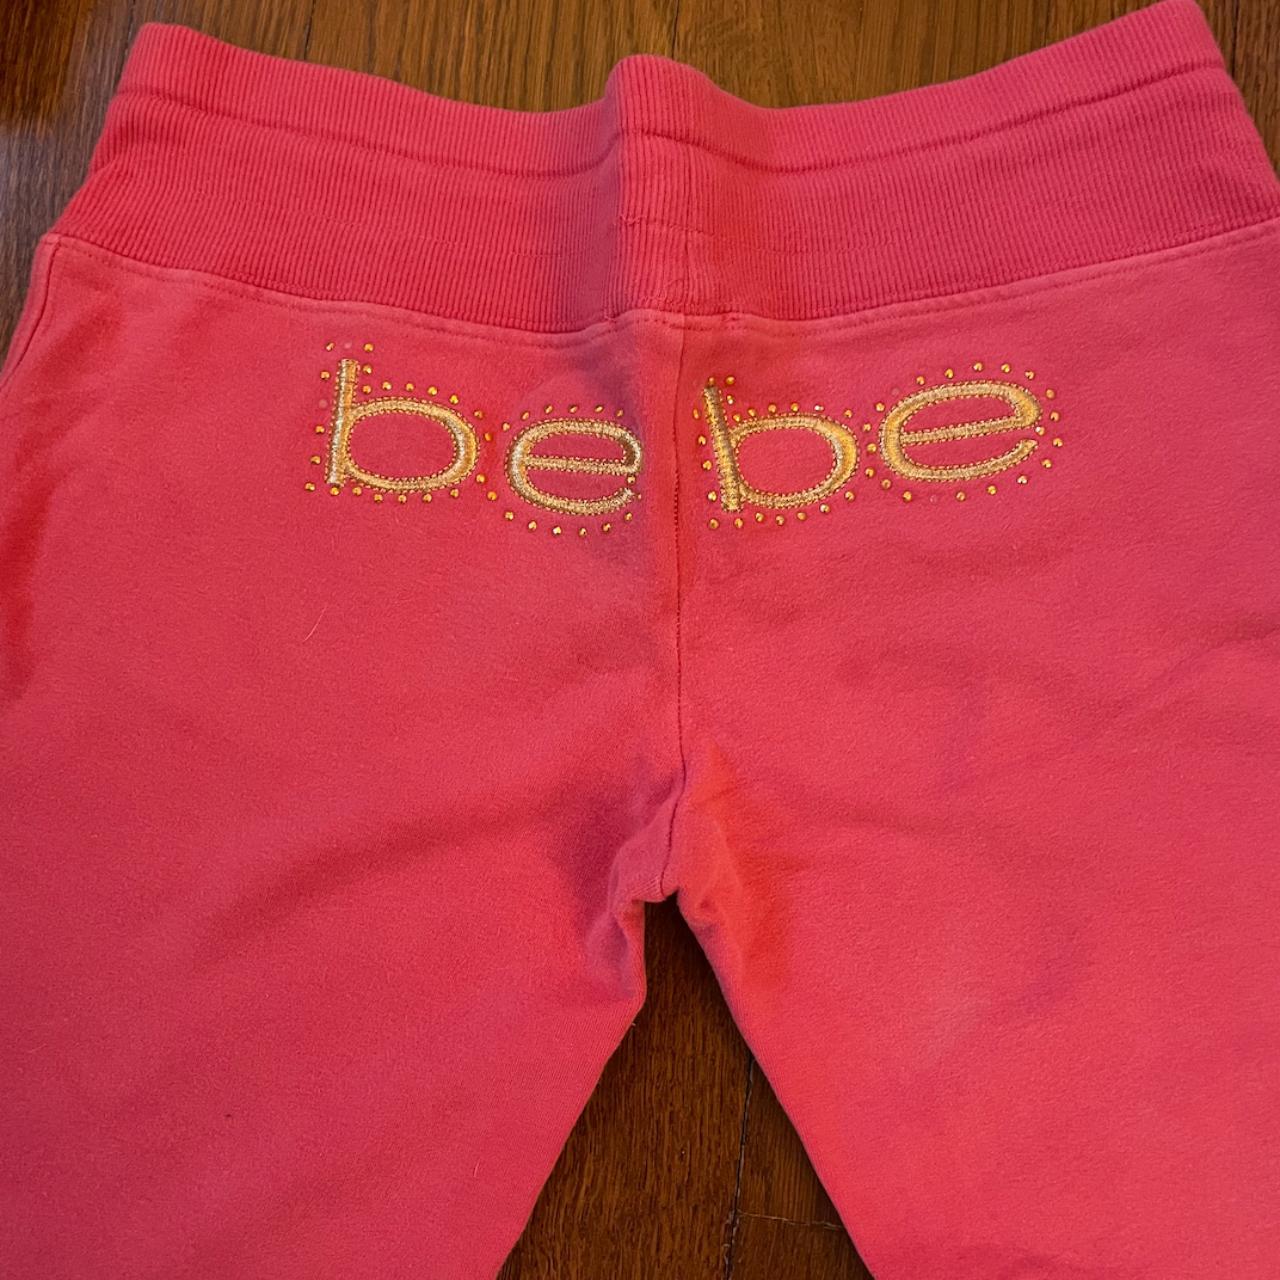 Bebe Women's Pink and Gold Joggers-tracksuits (3)